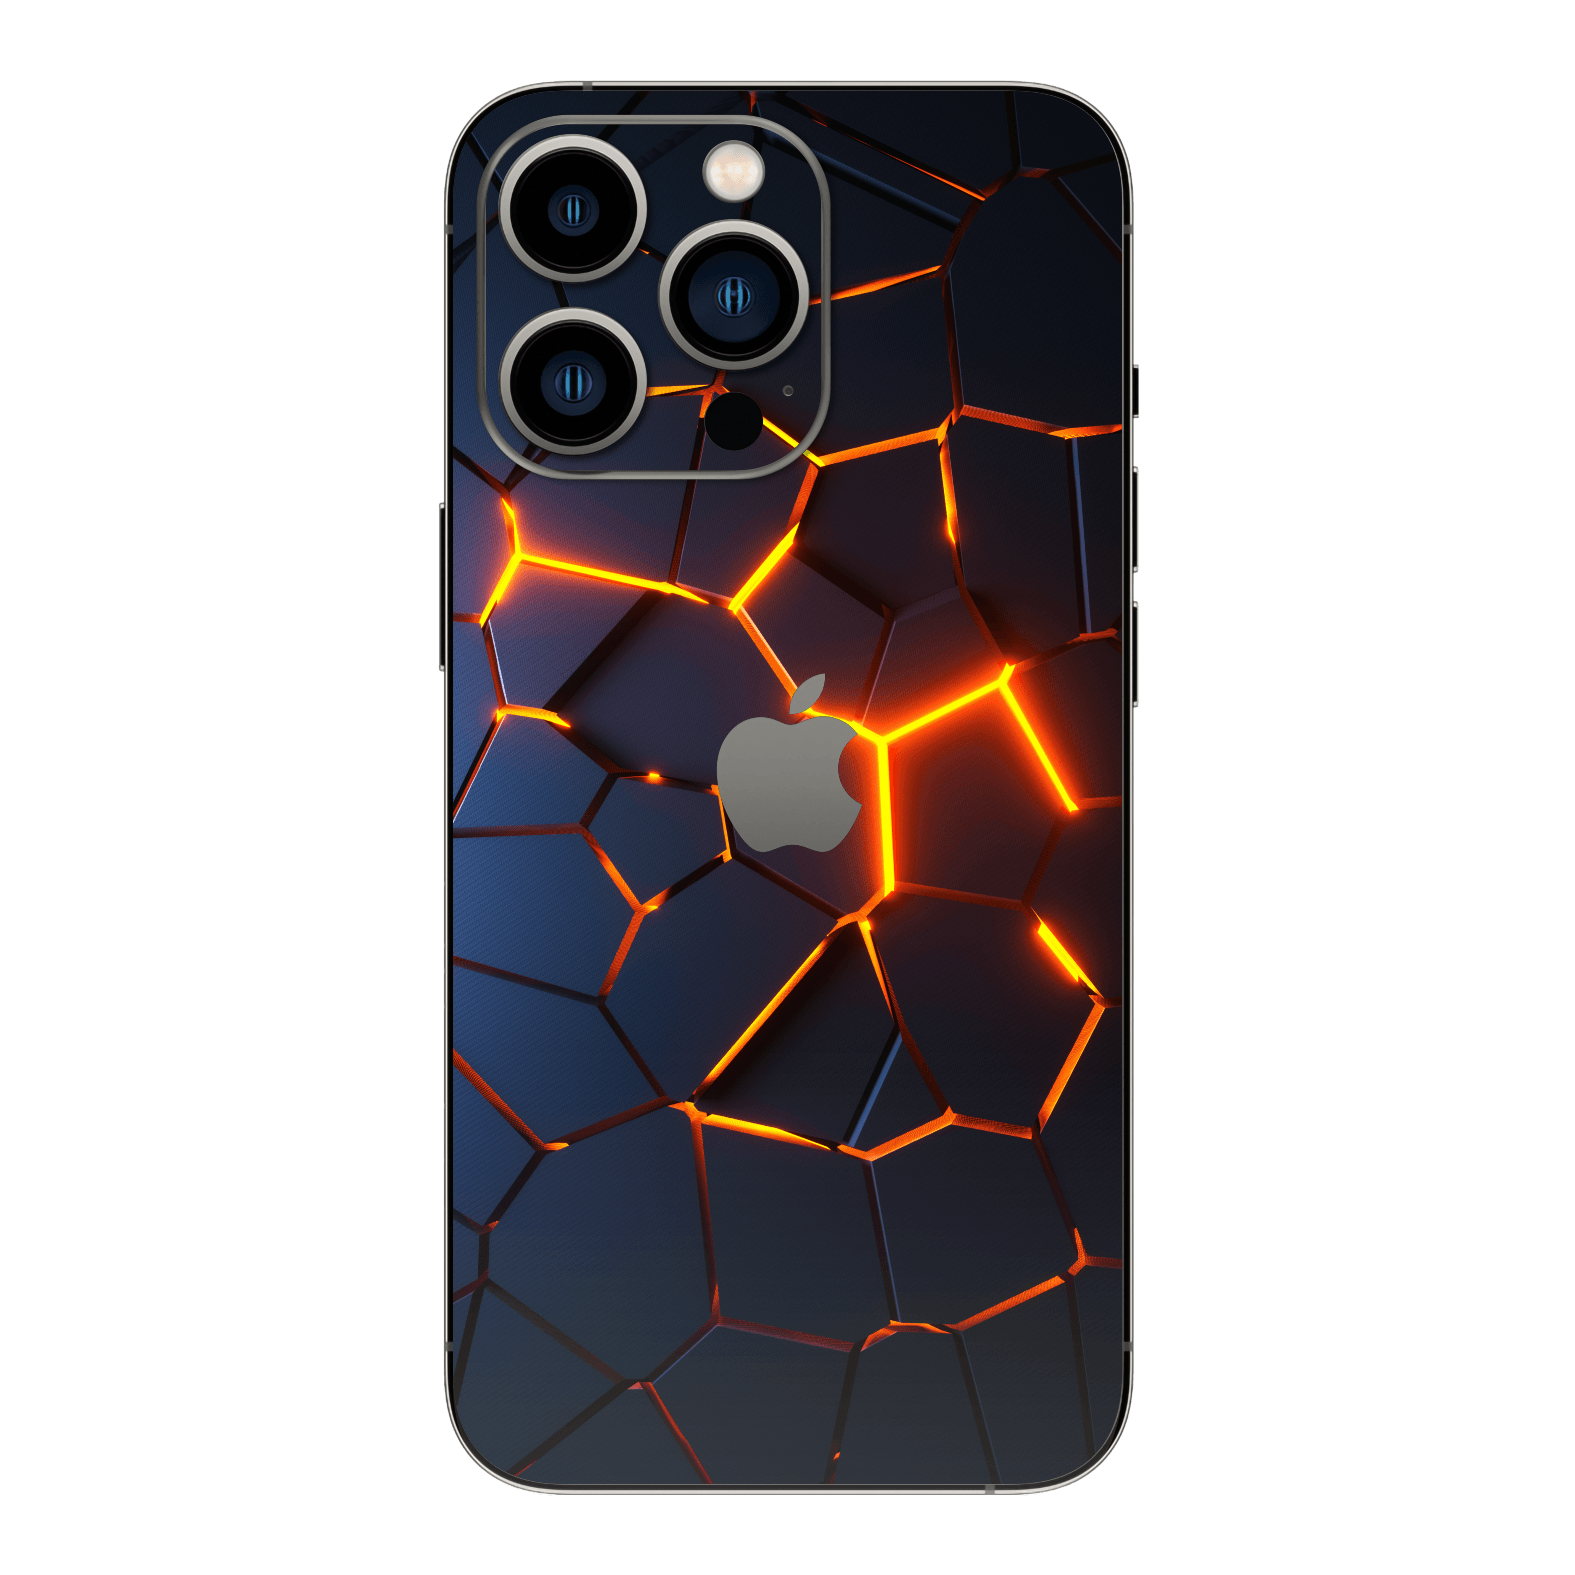 iPhone 13 Pro MAX SIGNATURE The Core Skin - Premium Protective Skin Wrap Sticker Decal Cover by QSKINZ | Qskinz.com